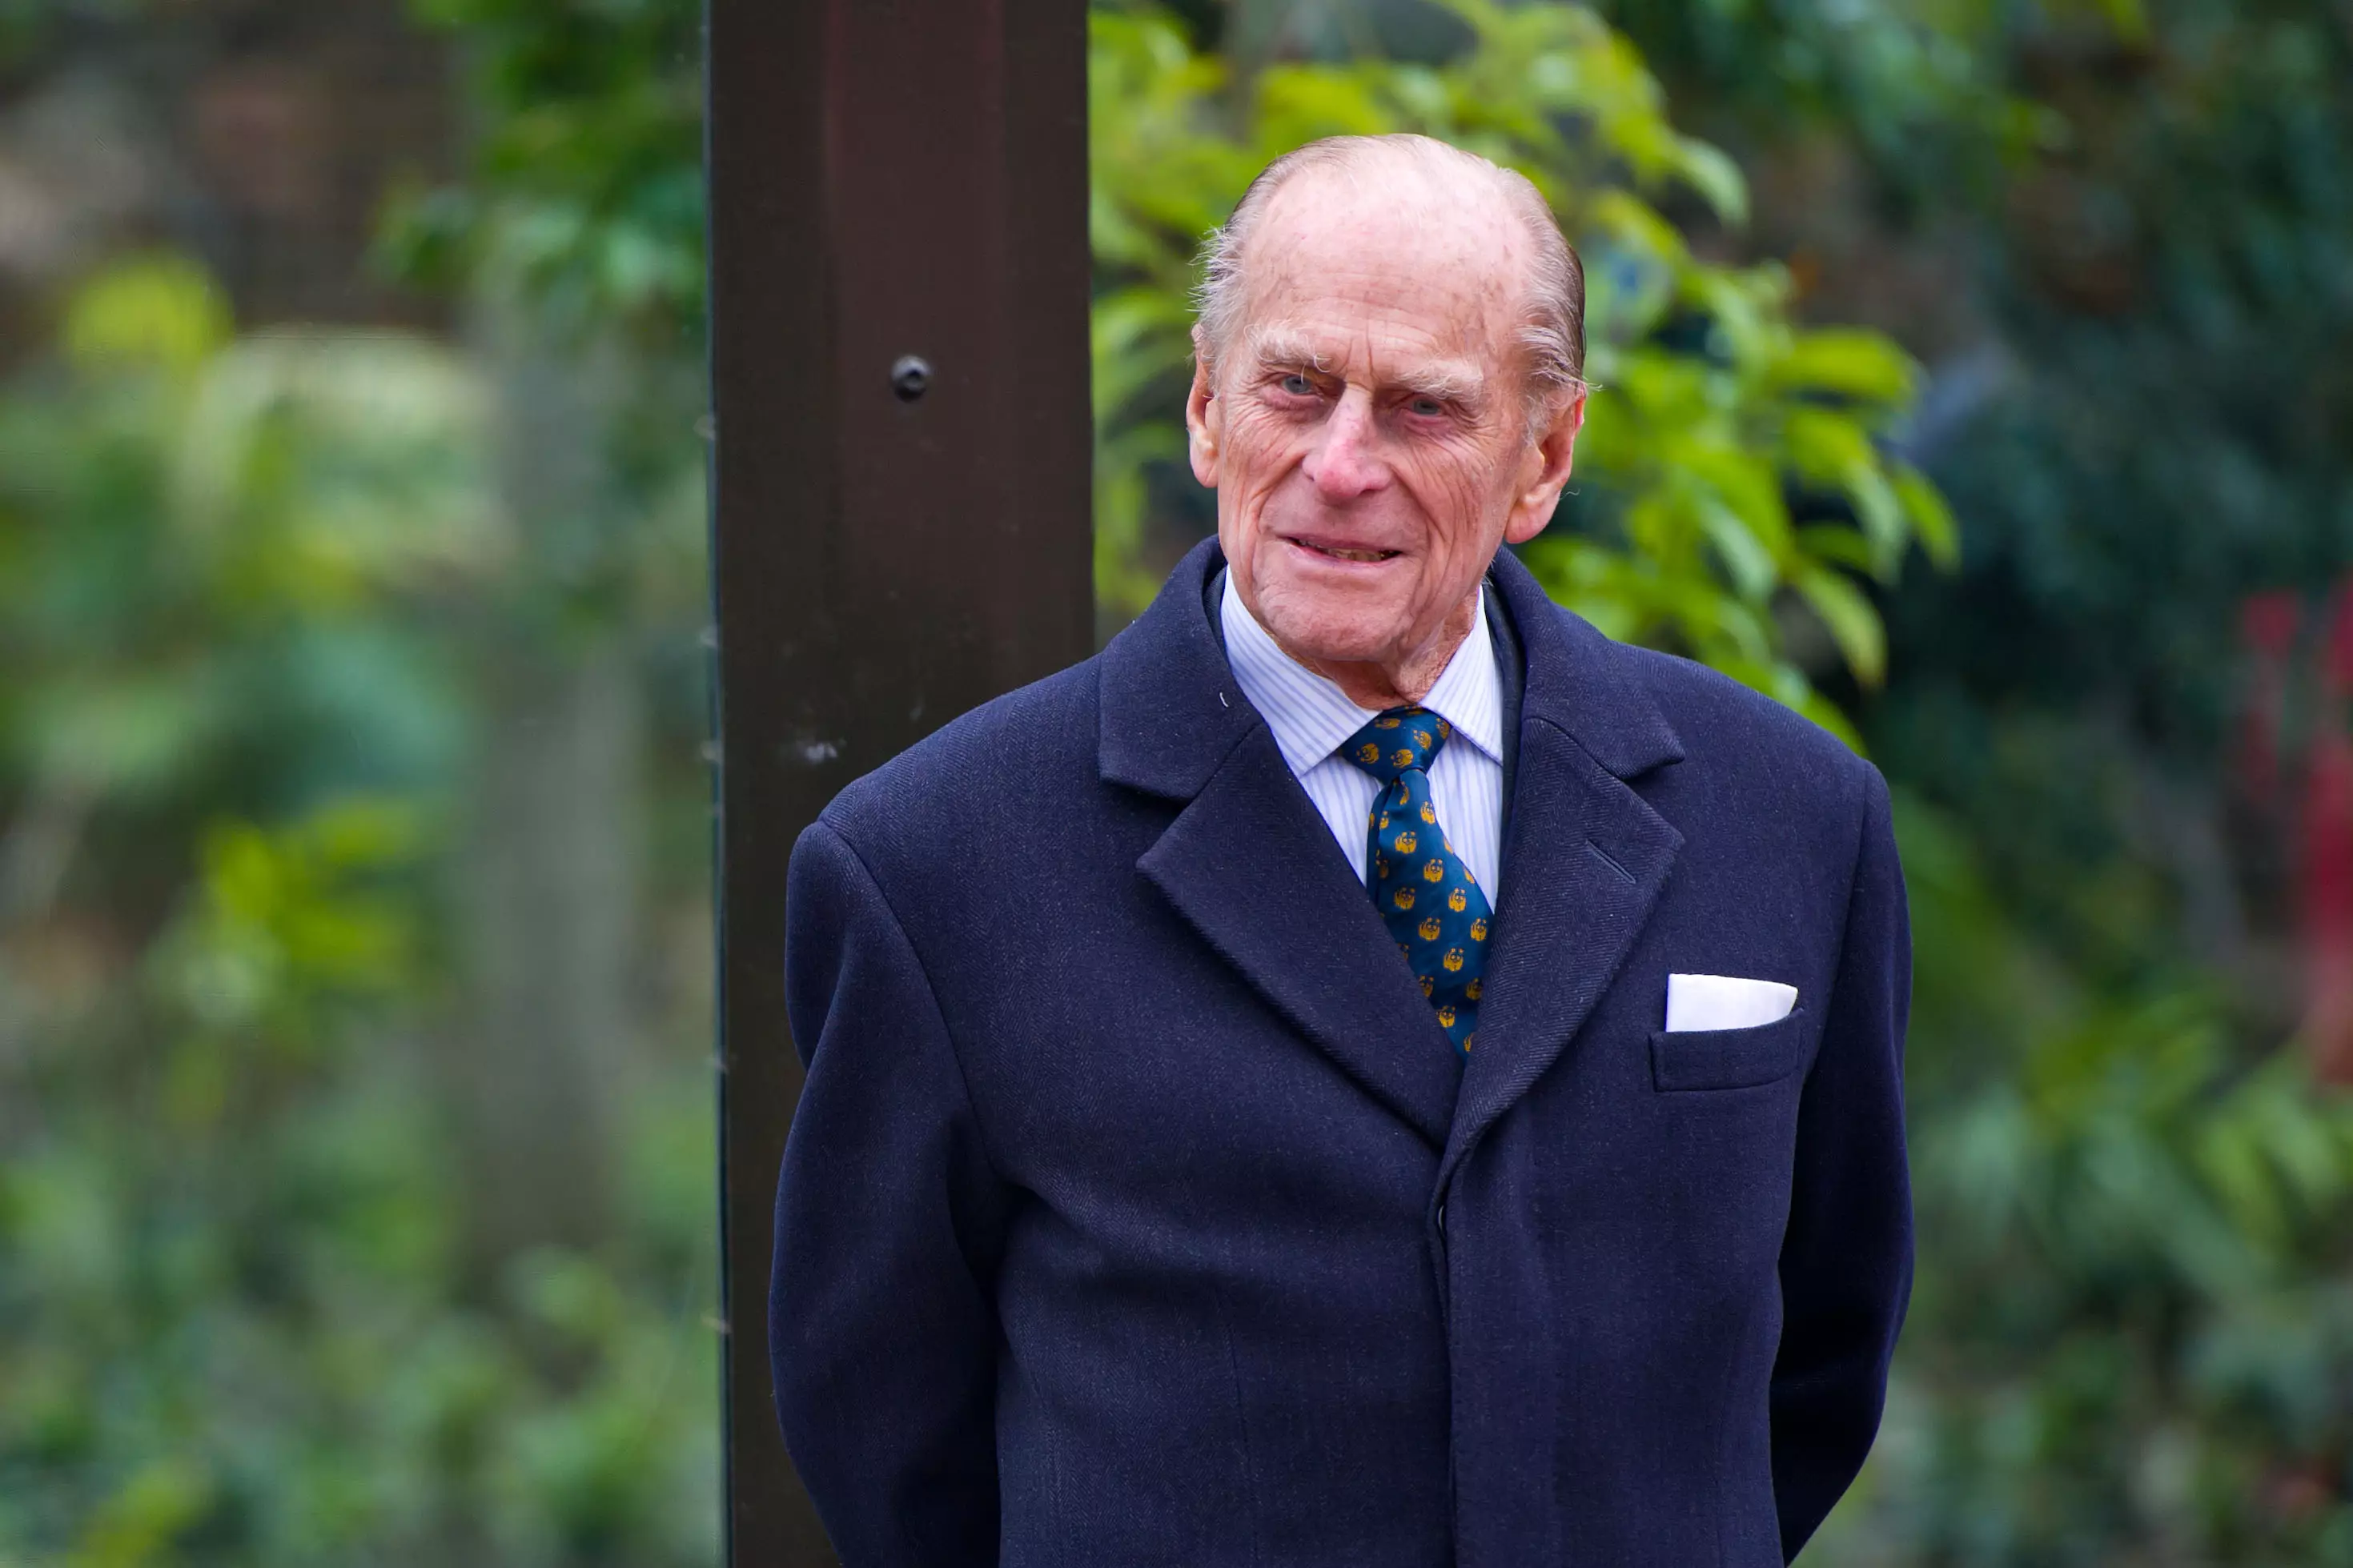 Prince Philip will be laid to rest today.